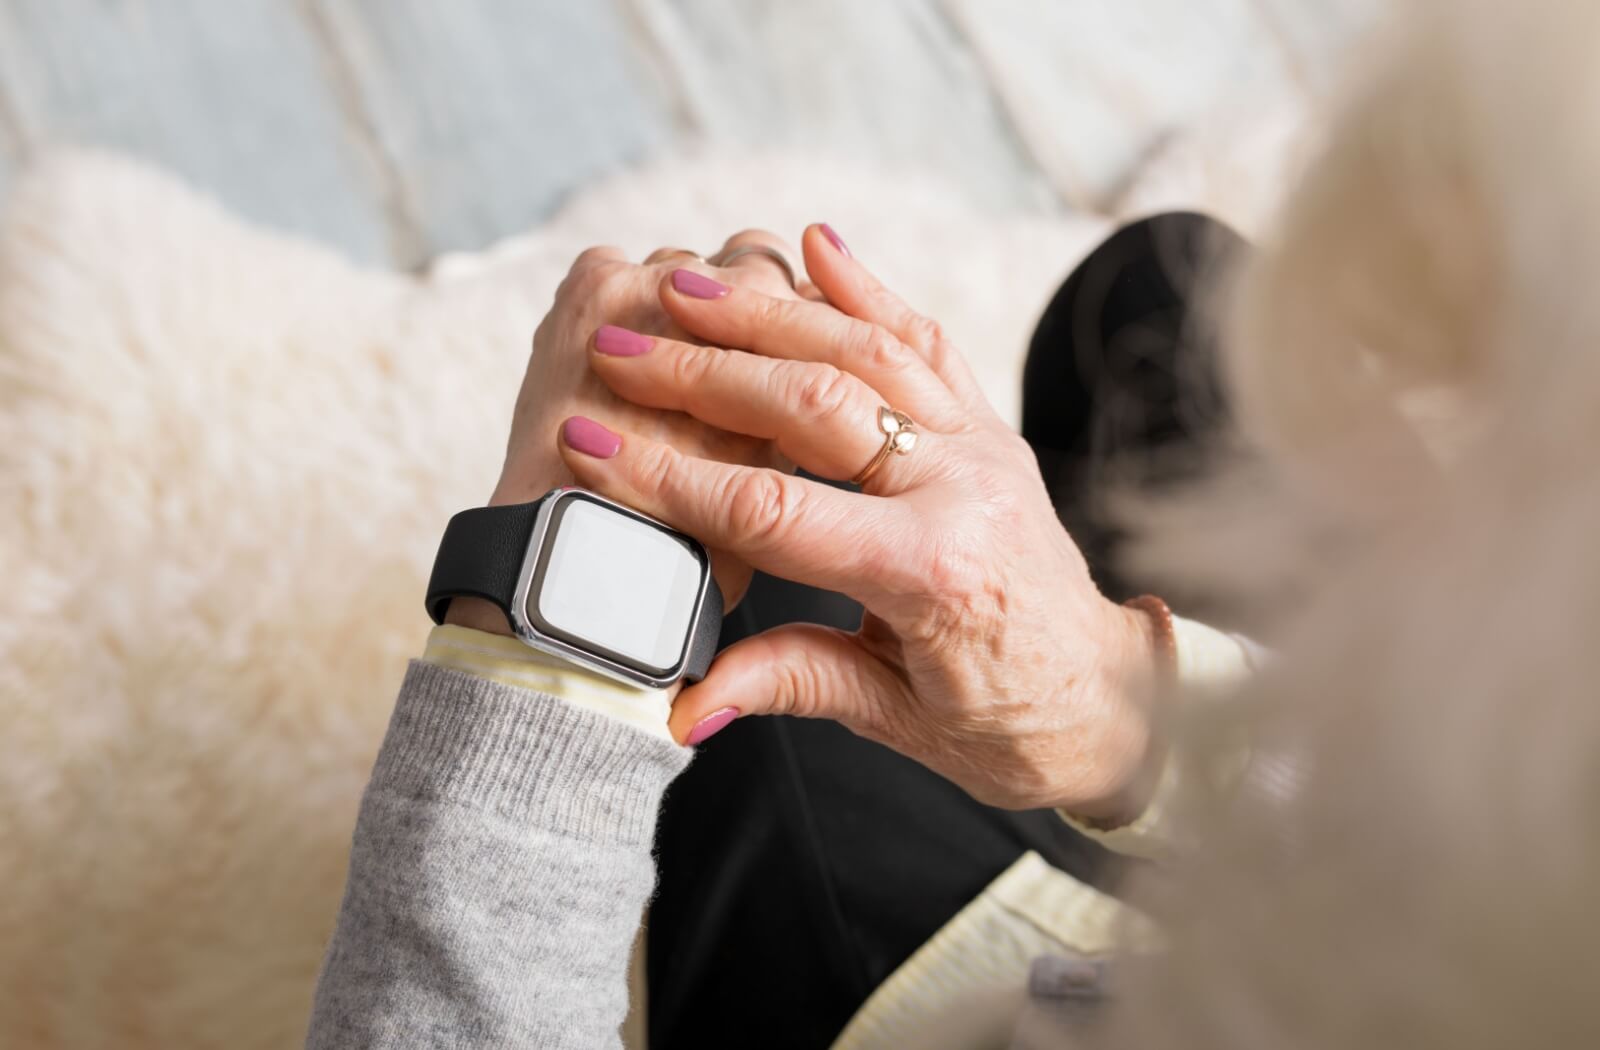 An older adult woman interacting with her smartwatch.